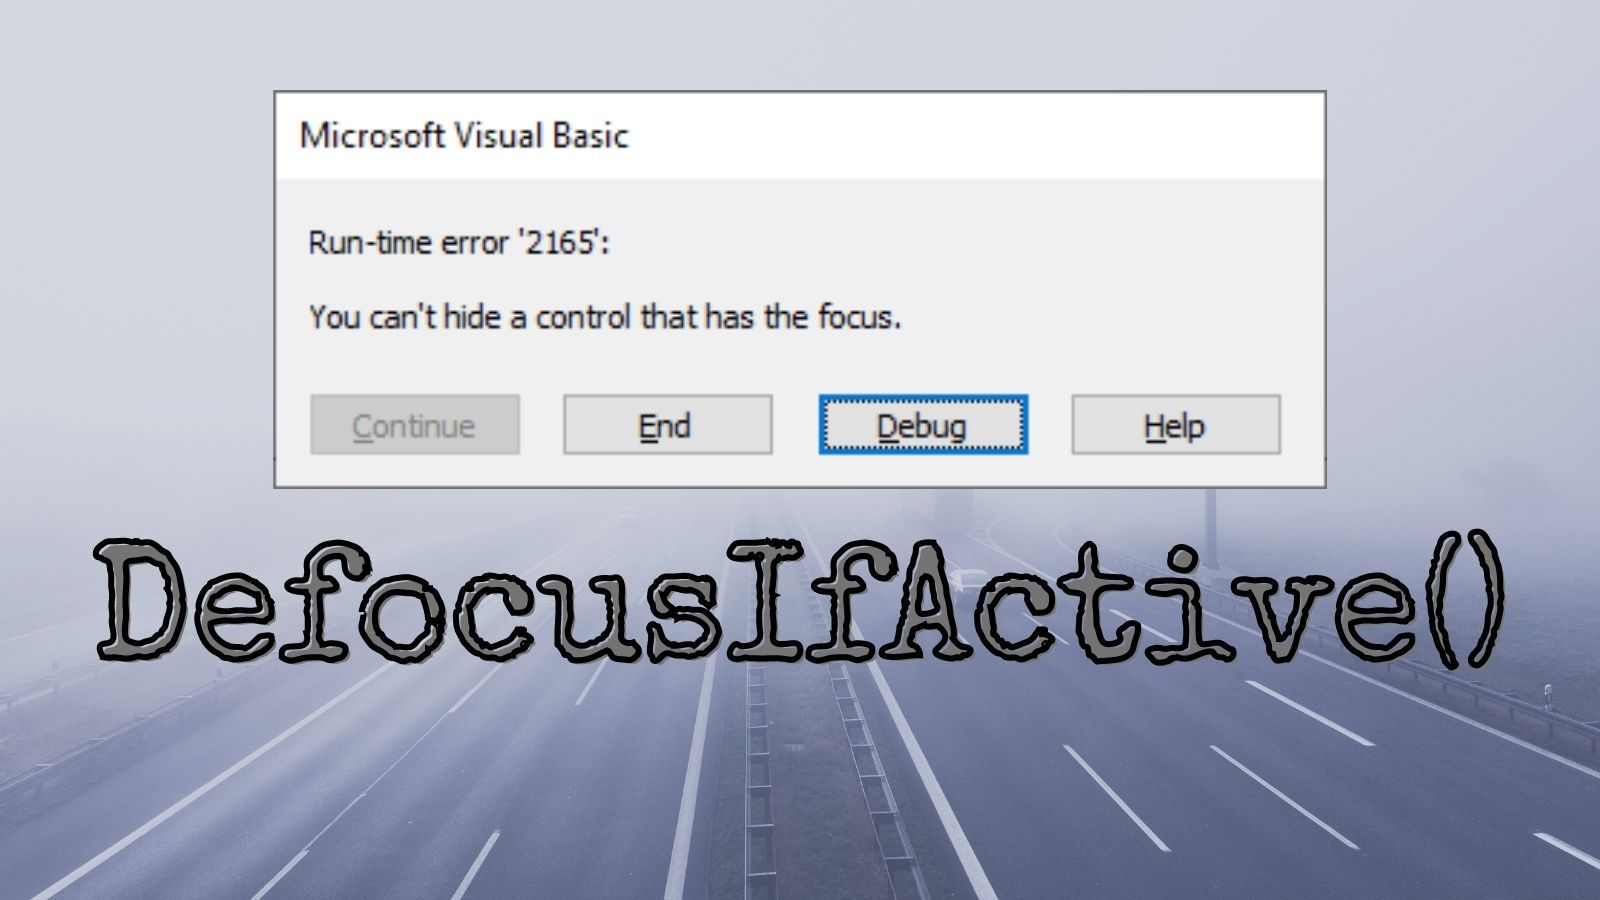 Fix for the error: "You can't hide a control that has the focus" in Microsoft Access